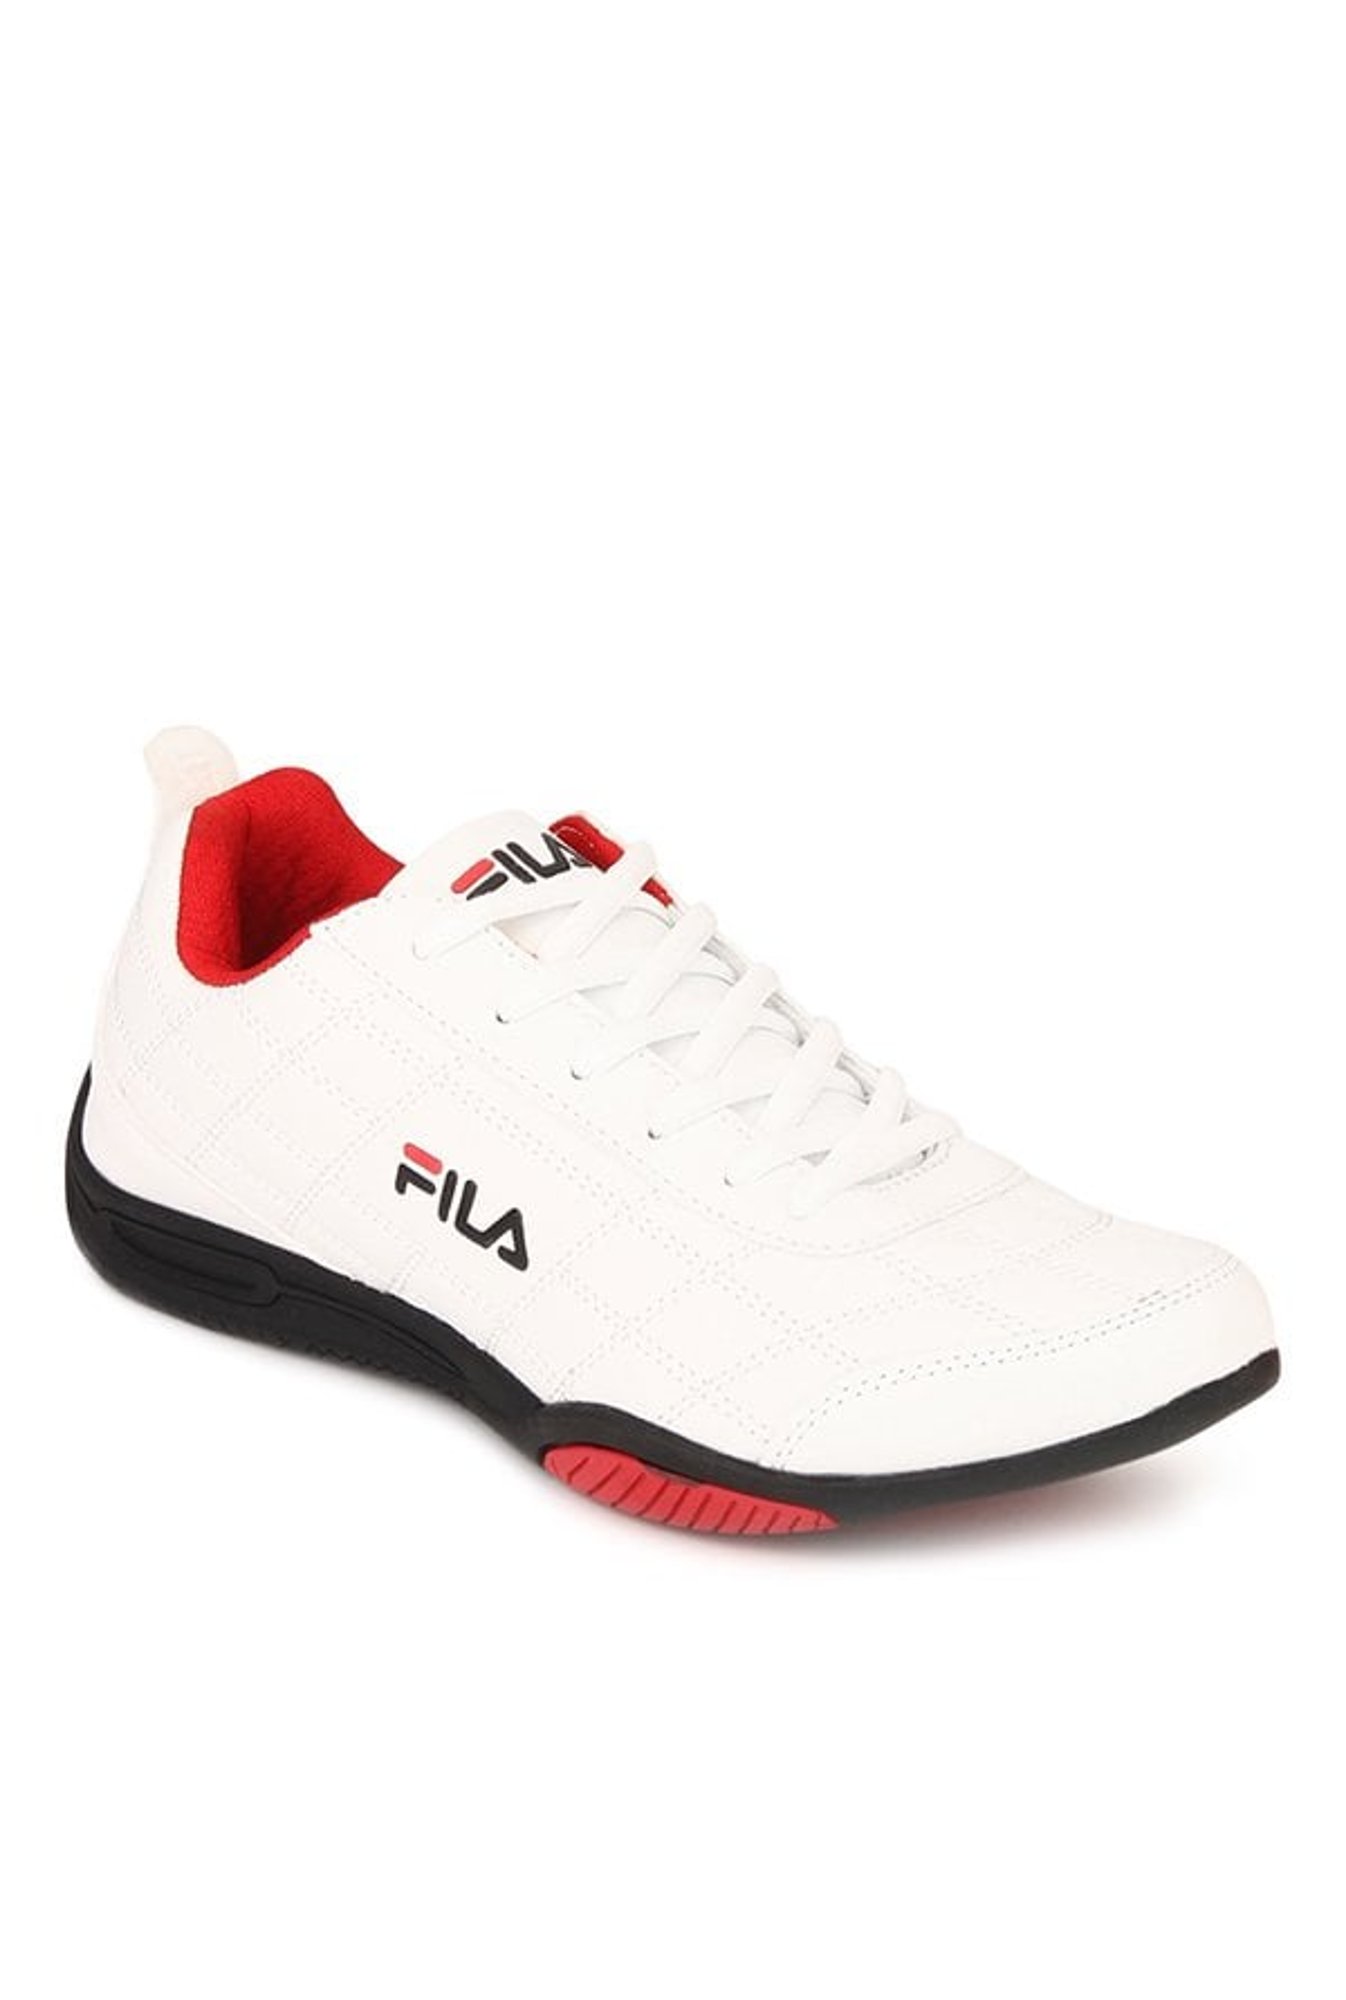 Fila Disruptor 2 Premium Women's Lace Up Chunky Sole Leather Sneakers In  White Size 8.5 - Walmart.com